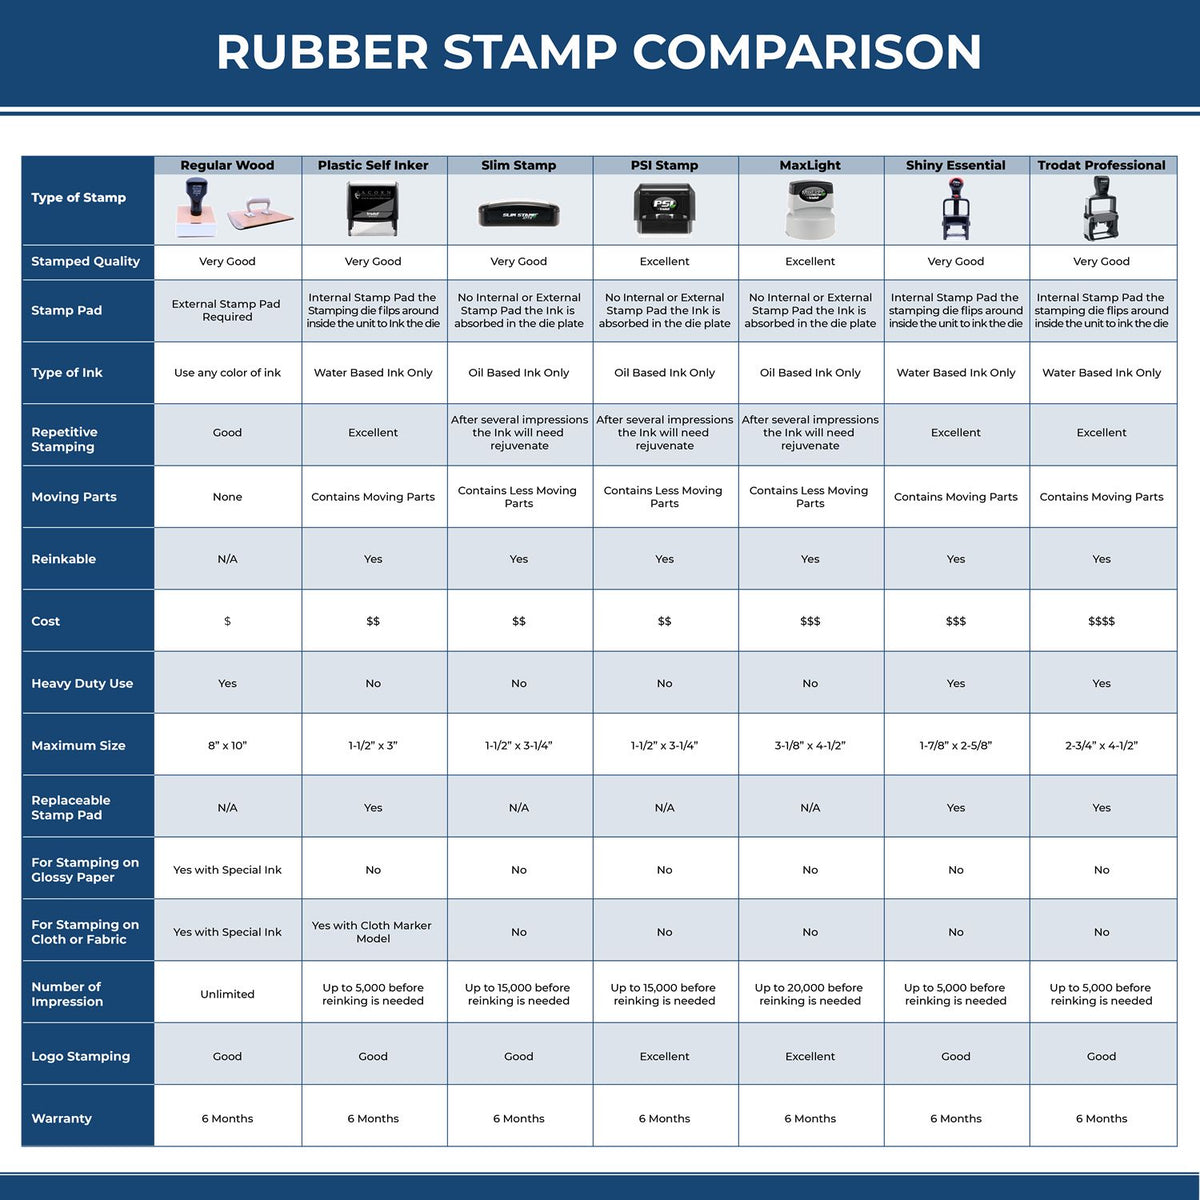 A comparison chart for the different types of mount models available for the Slim Pre-Inked Rectangular Notary Stamp for Washington.